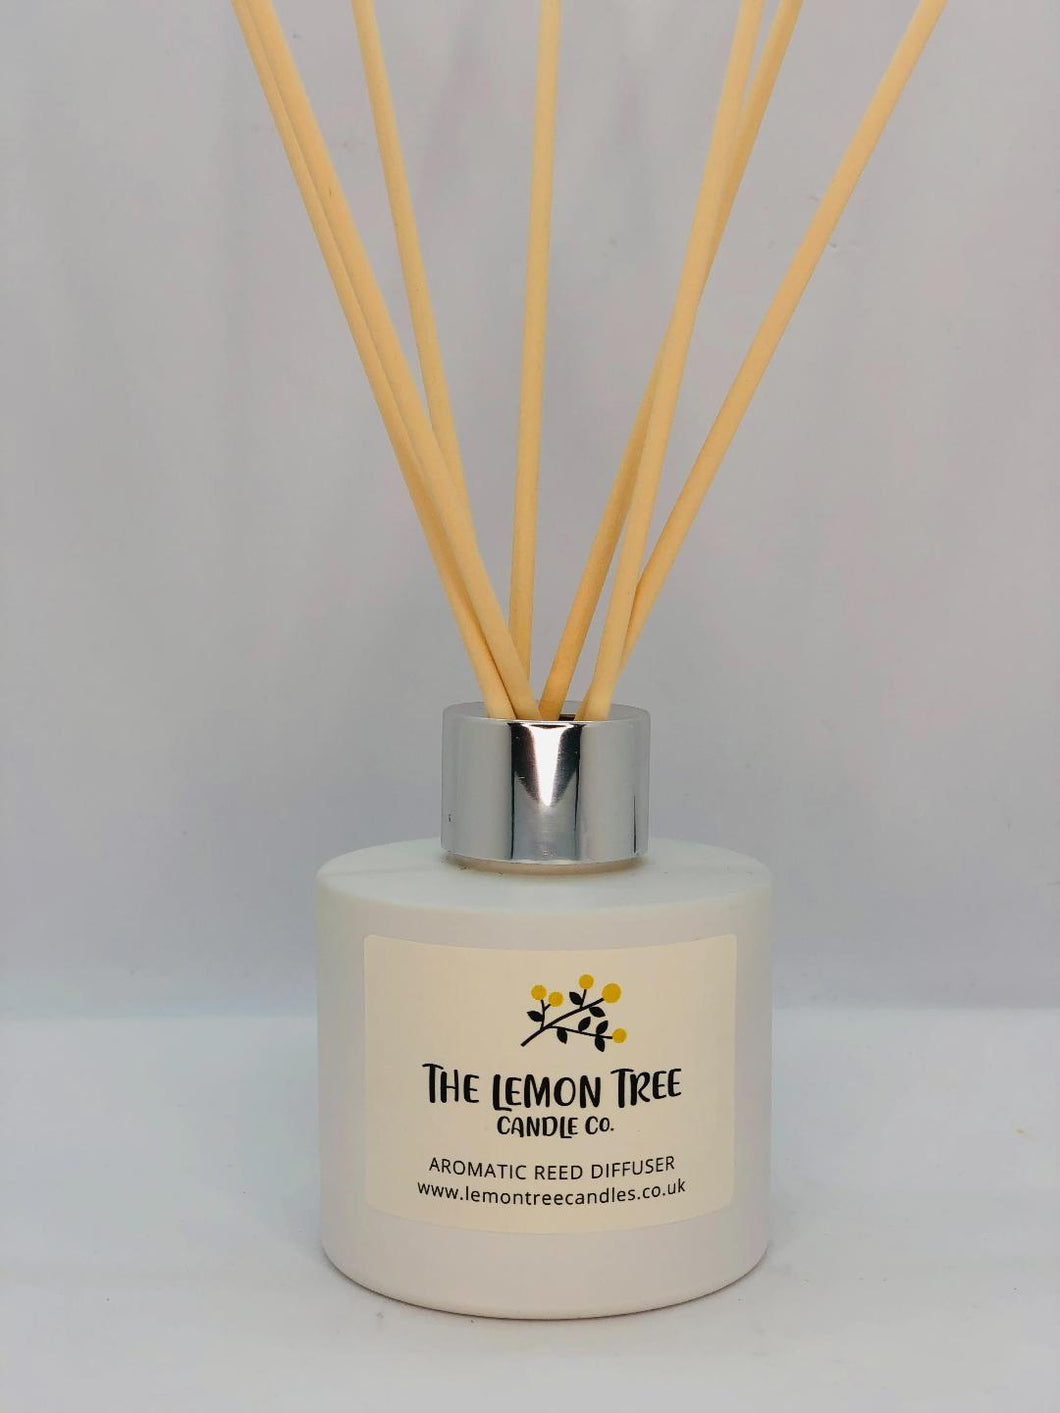 Mor Menai White Glass Diffuser - Rock Pools and Salty Air - The Lemon Tree Candle Company